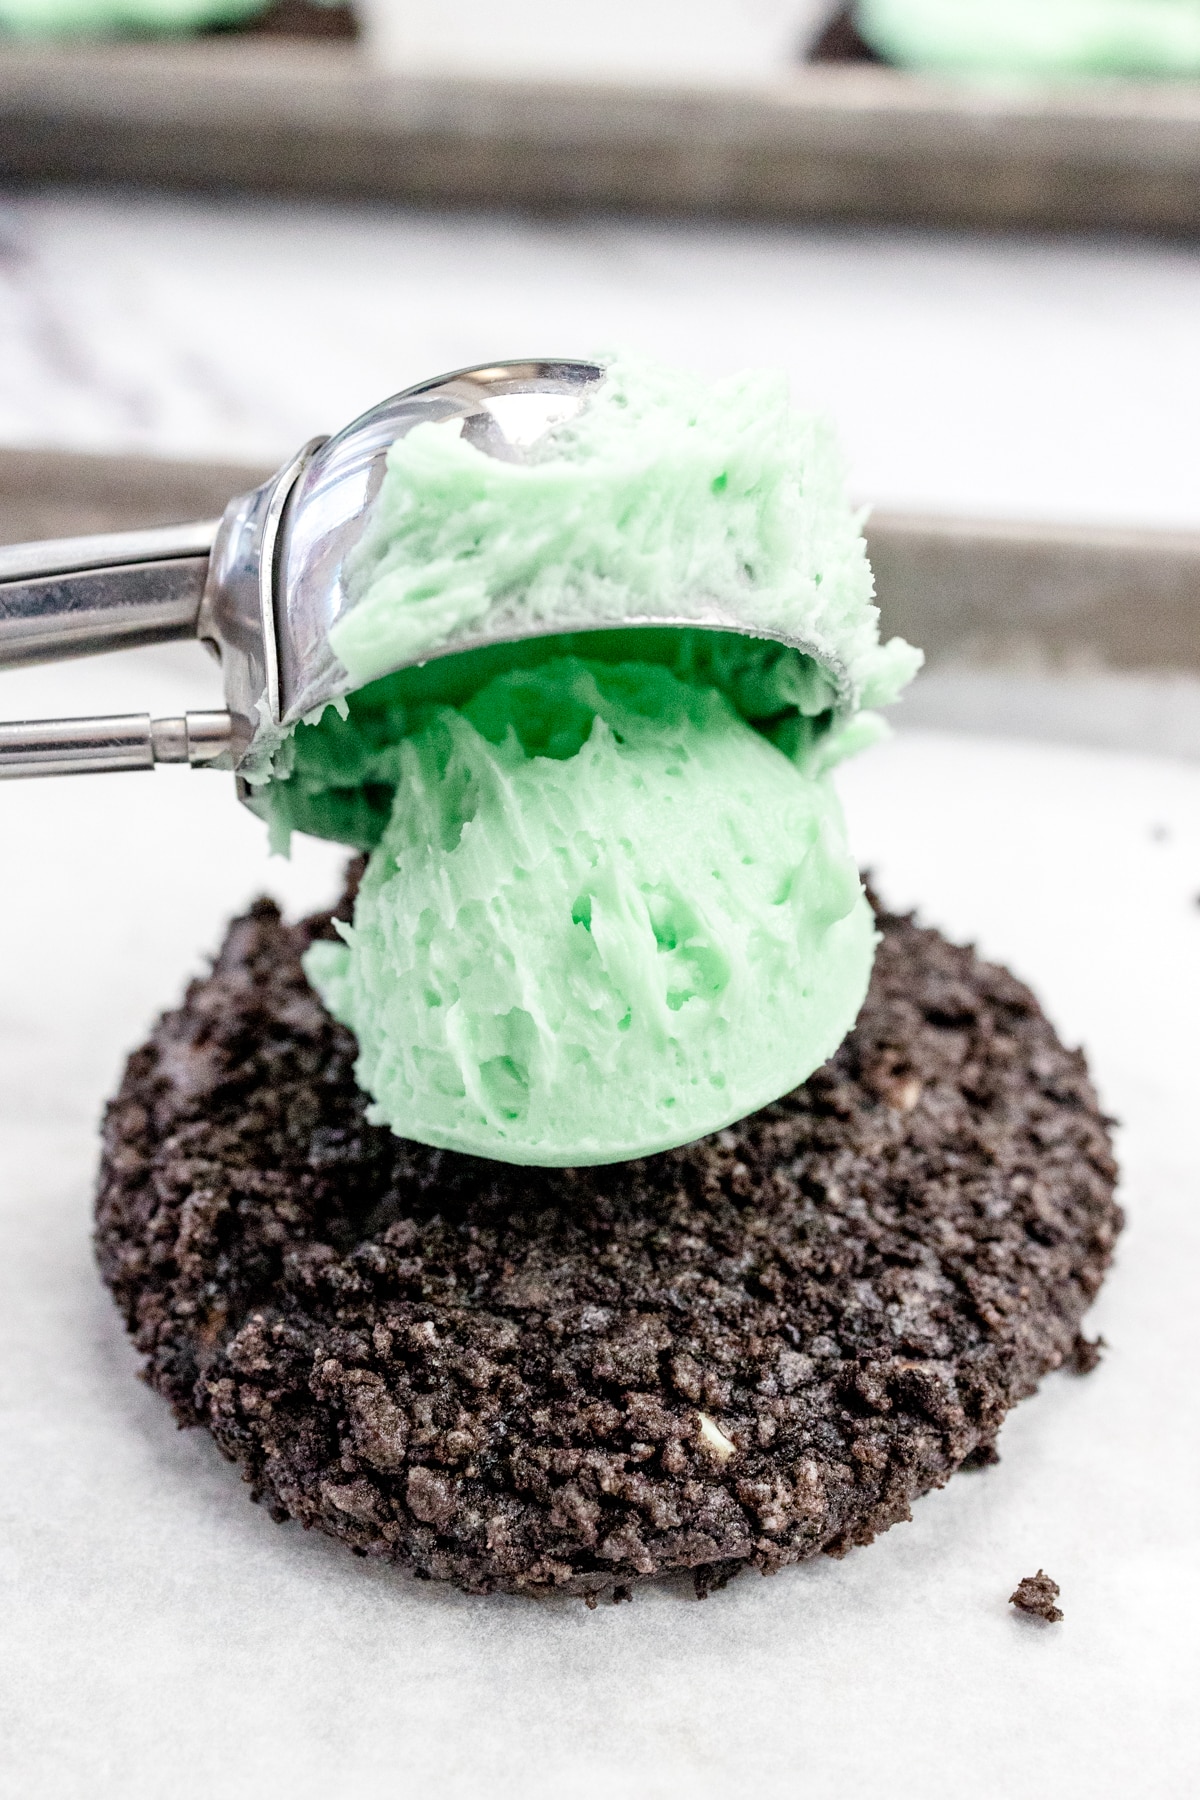 Close up of a cookie scoop placing a scoop of mint frosting onto a mint oreo cookie.